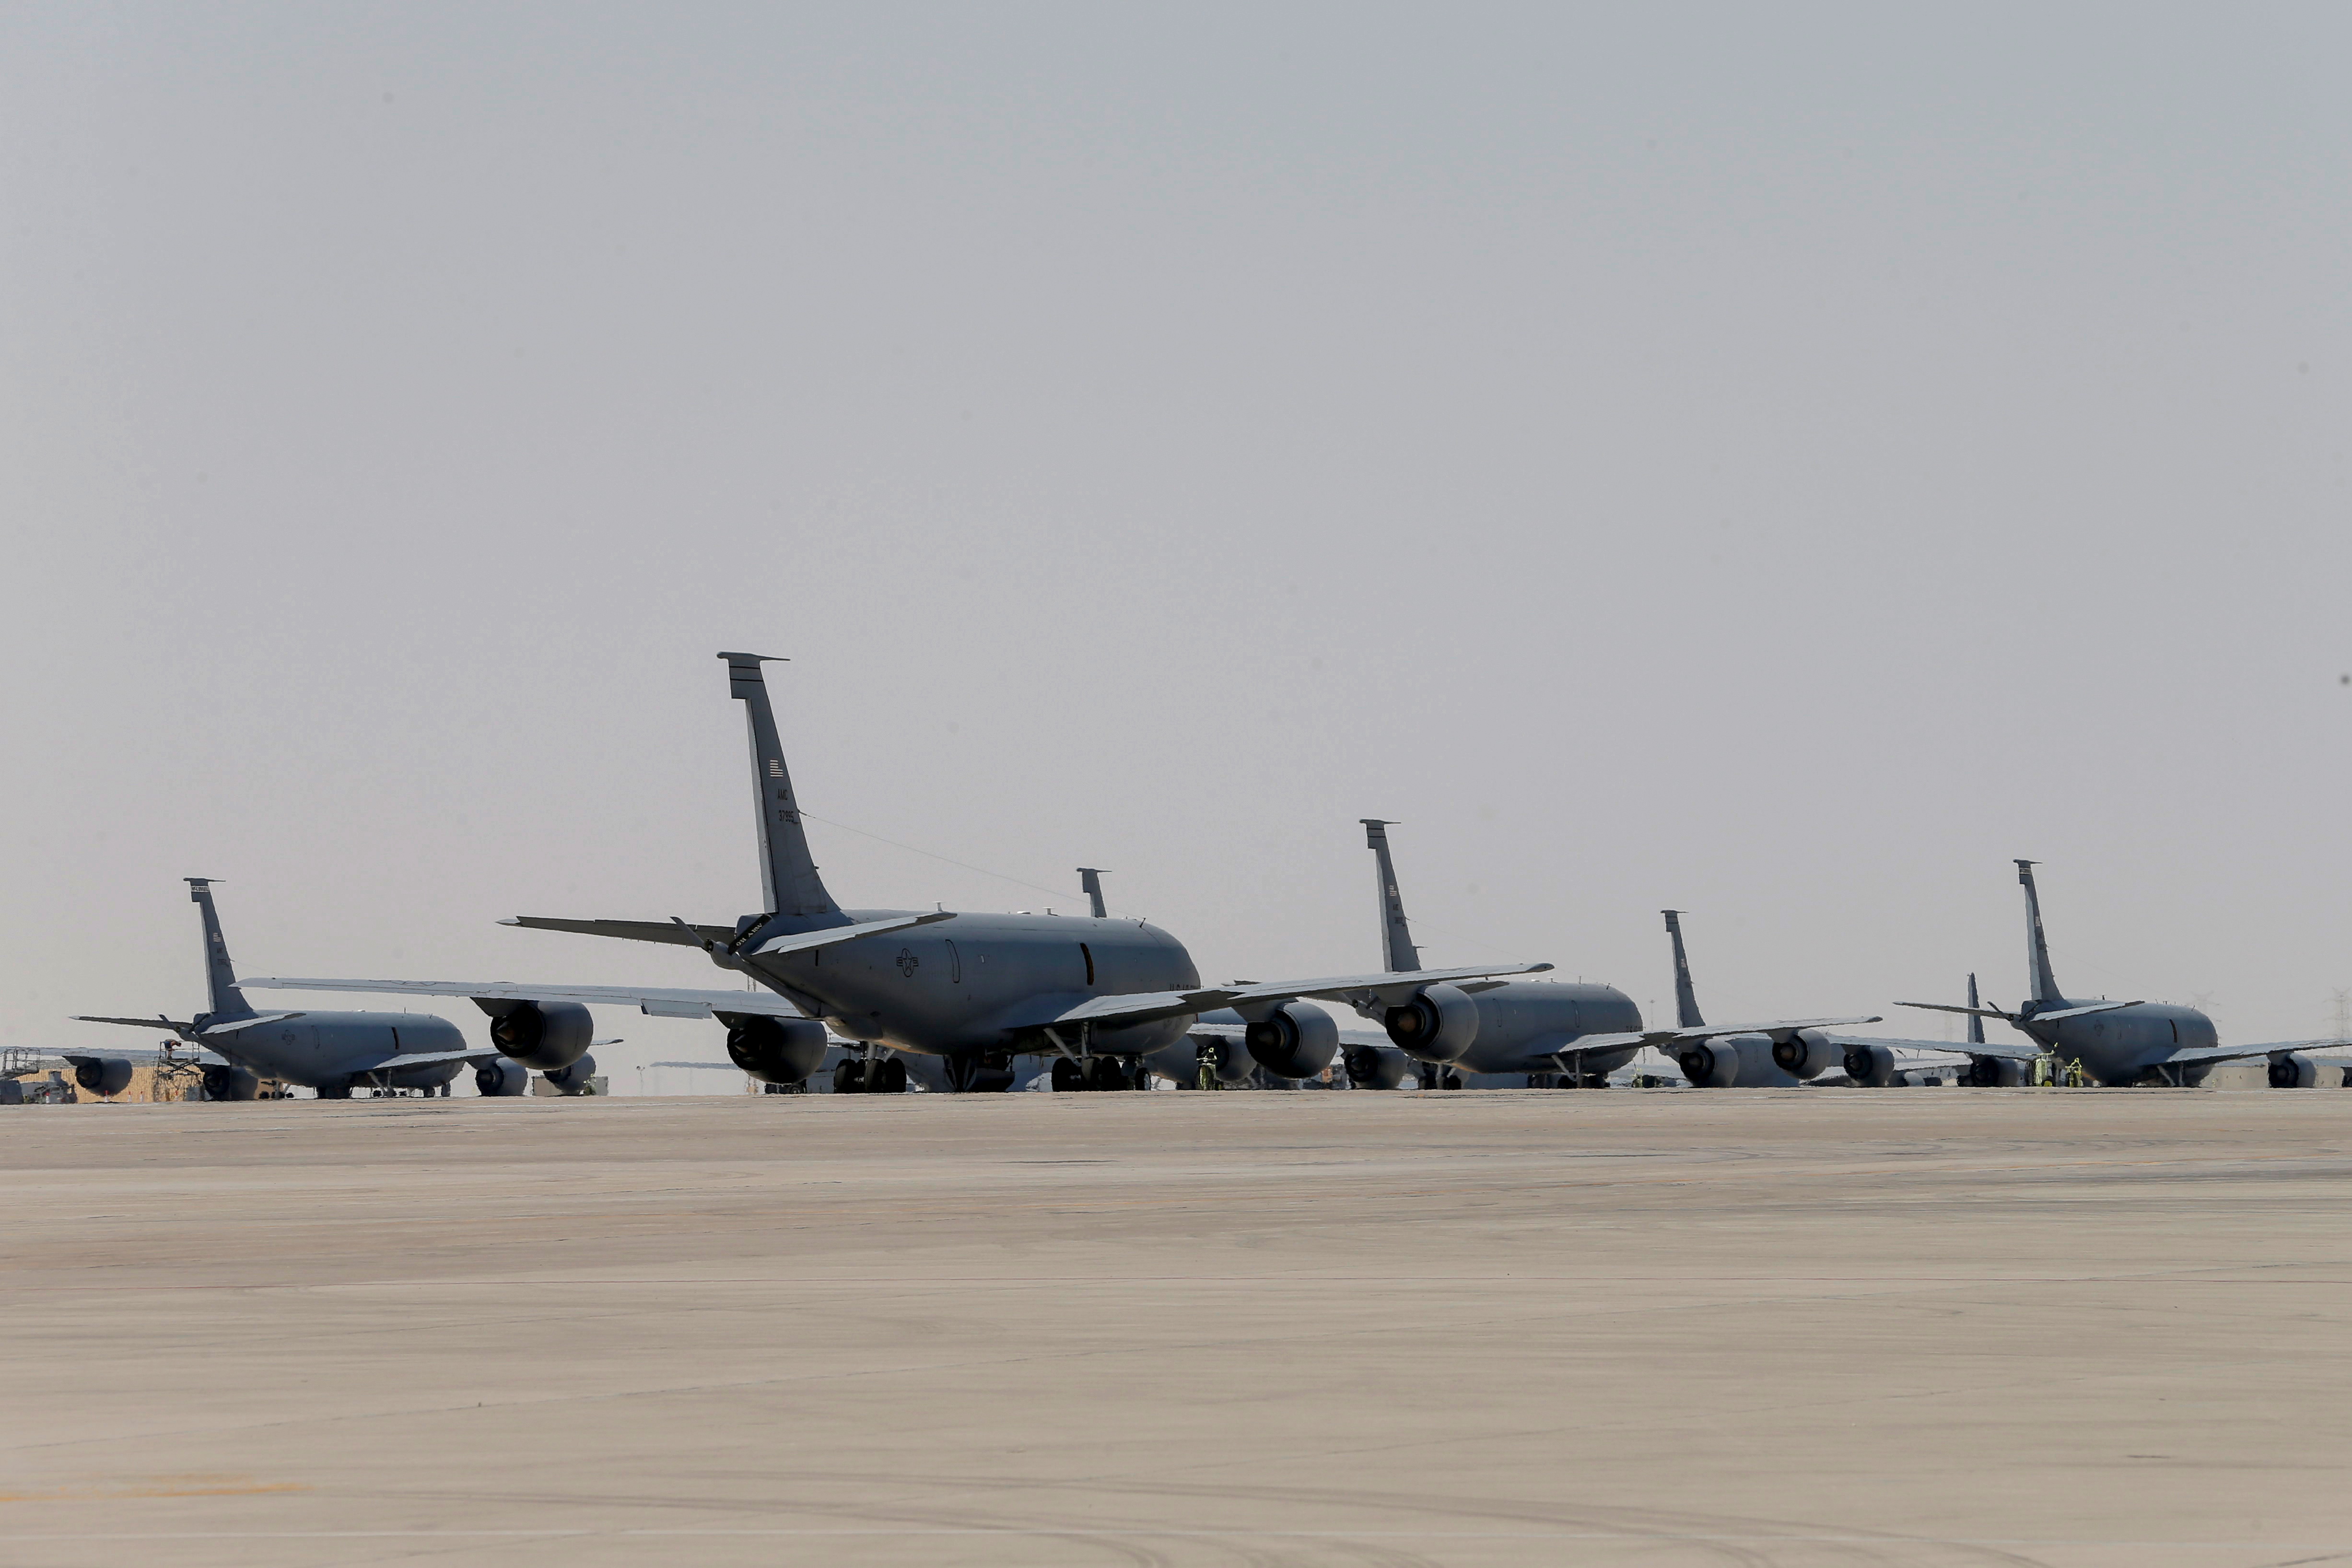 U.S. Air Force planes, which were used to evacuate people from Afghanistan, are seen at Al Udeid airbase in Doha